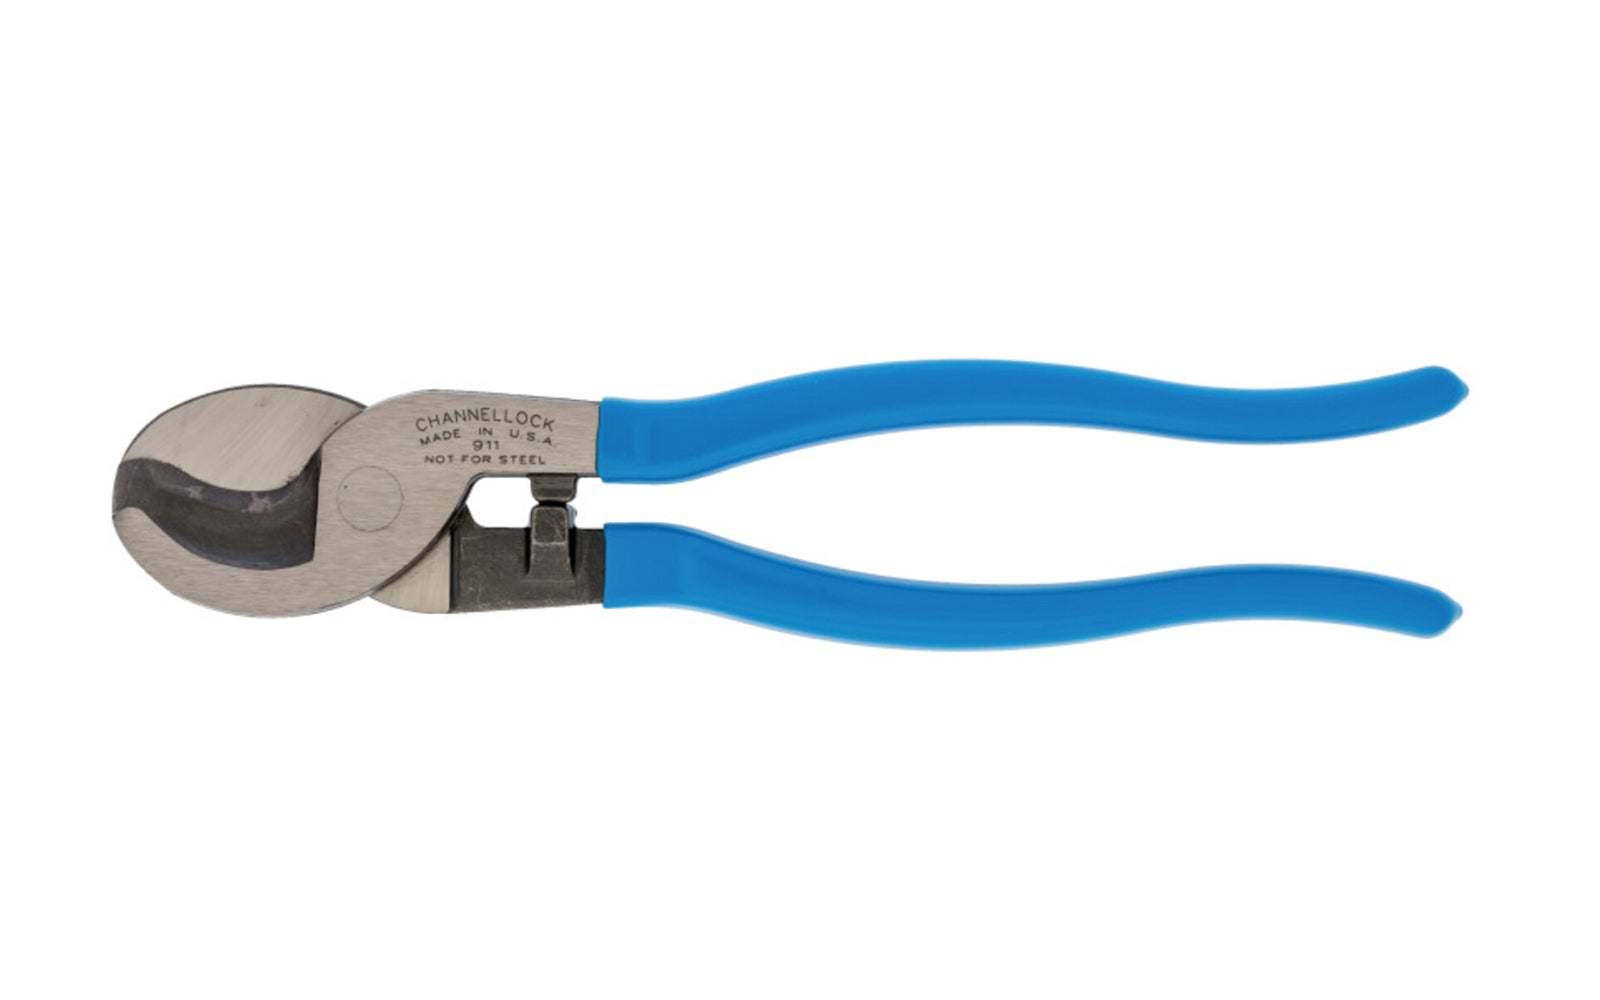 Channellock 9-1/2" Cable Cutting Pliers. Improved high alloy steel construction and a unique cable cutting design easily cuts through battery cables and other soft metals & cables up to 4/0 aluminum and 2/0 copper. Channelock Model 911. Forged high alloy steel for ultimate strength & durability. Made in USA.